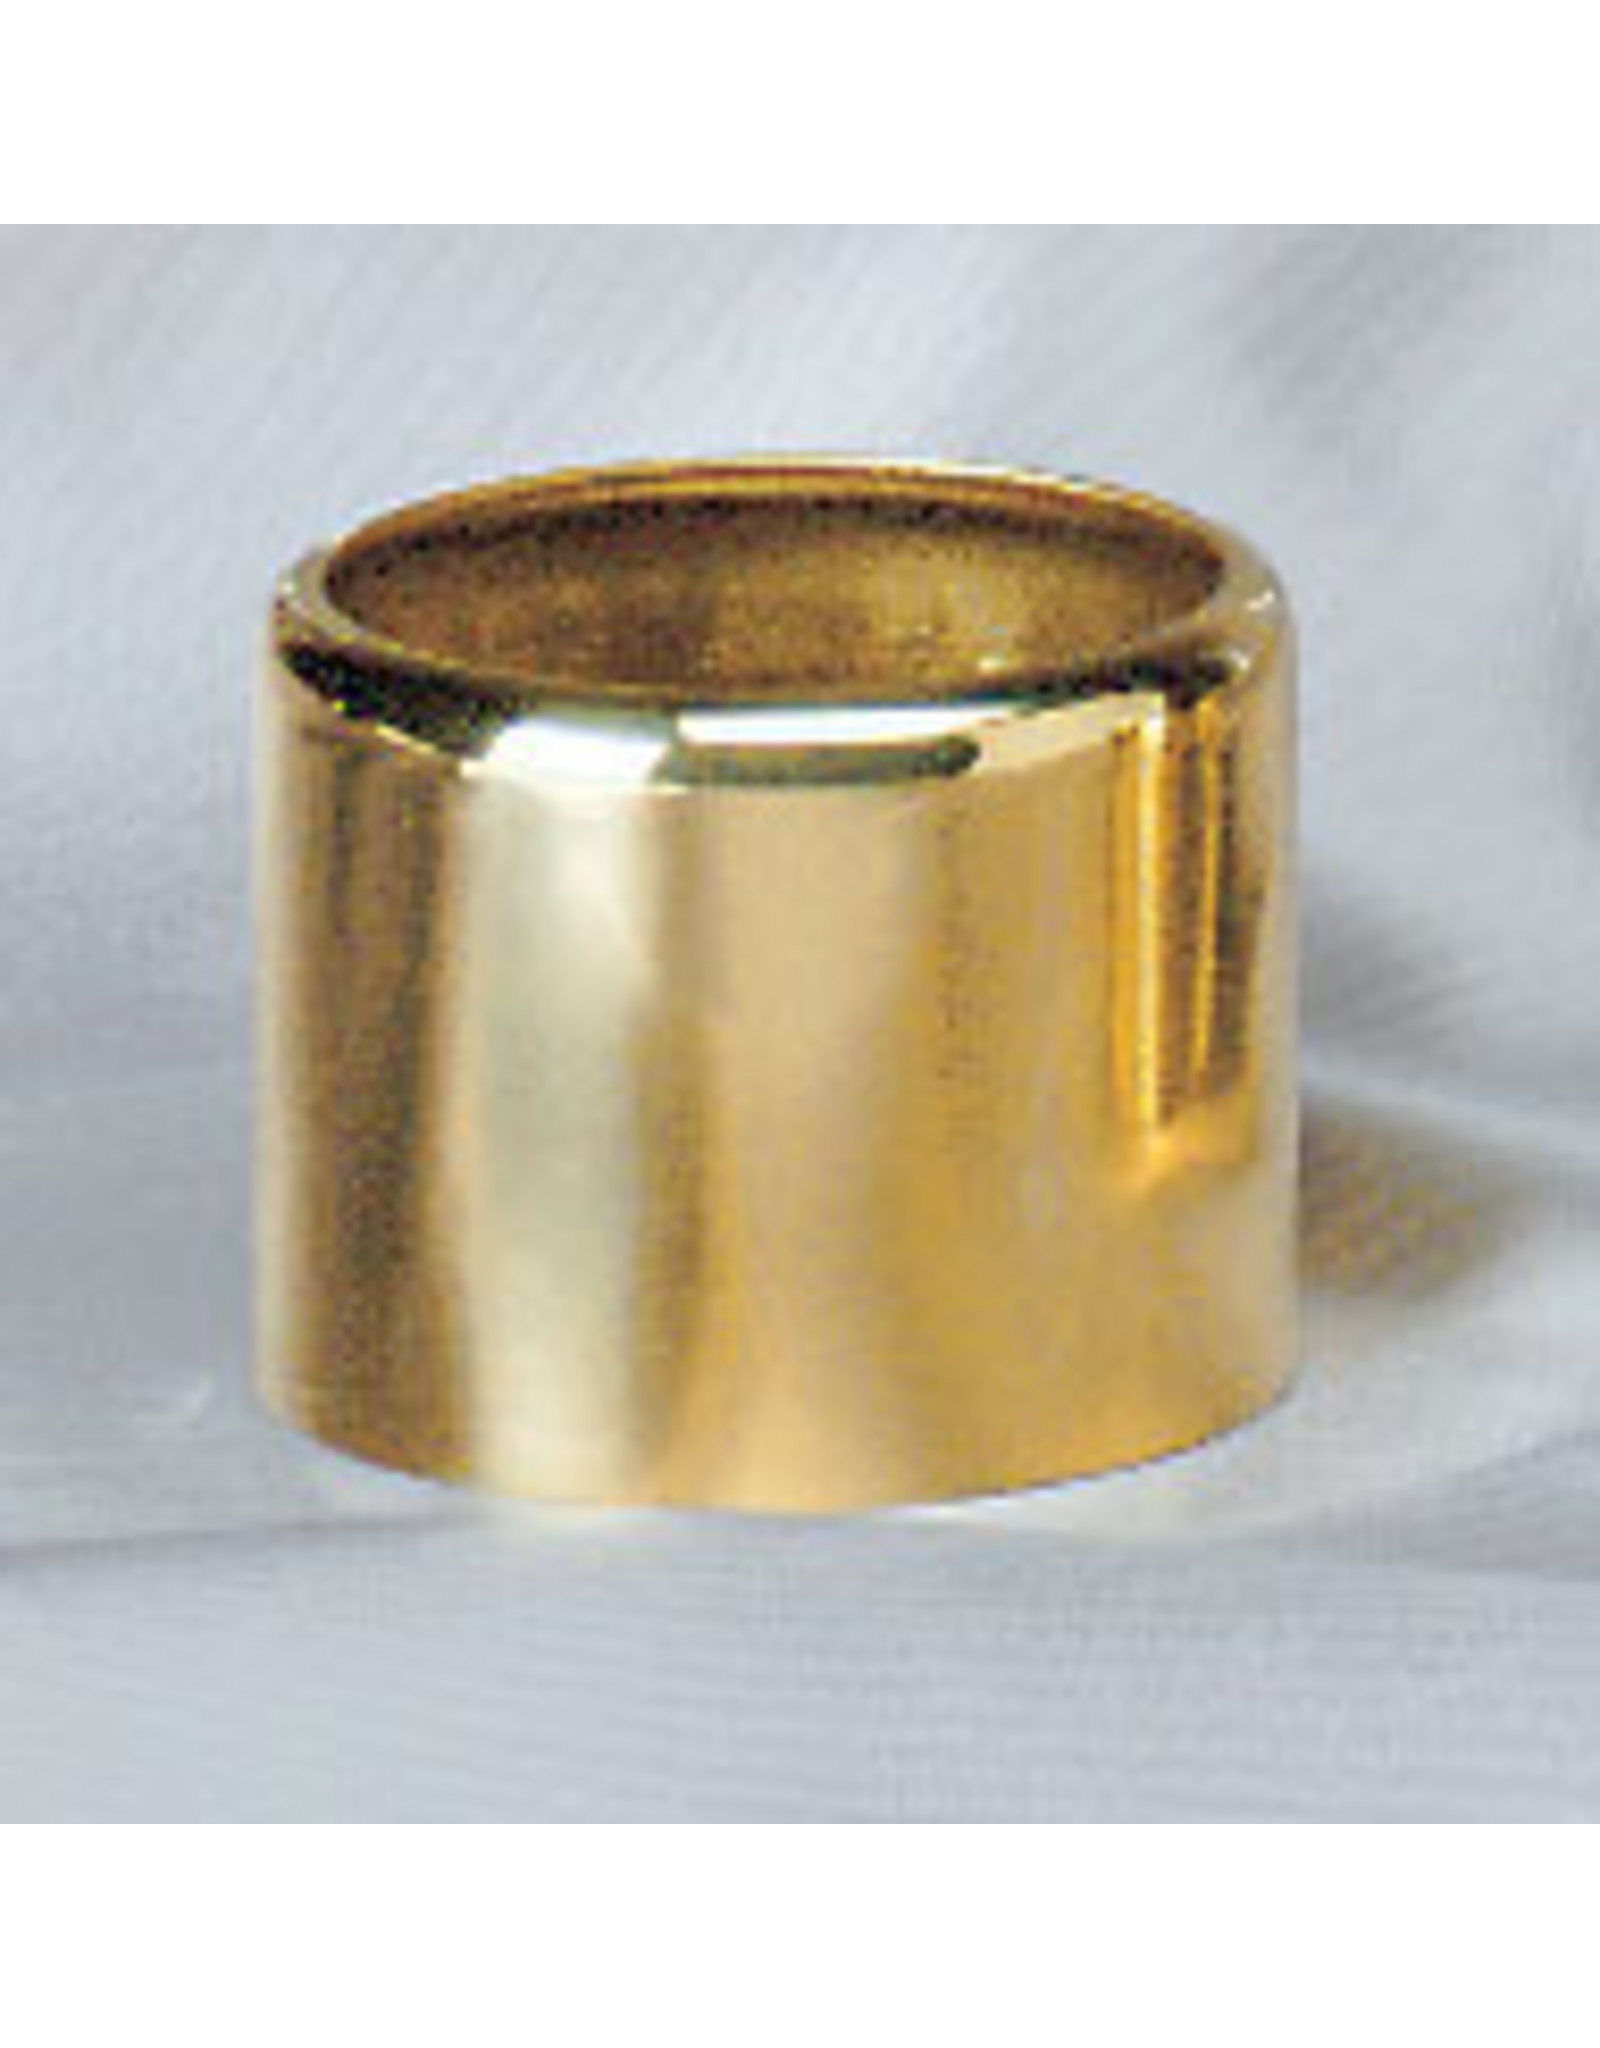 Emkay (Muench-Kreuzer) Brass Follower for 1-3/4" Oil Candle Shell